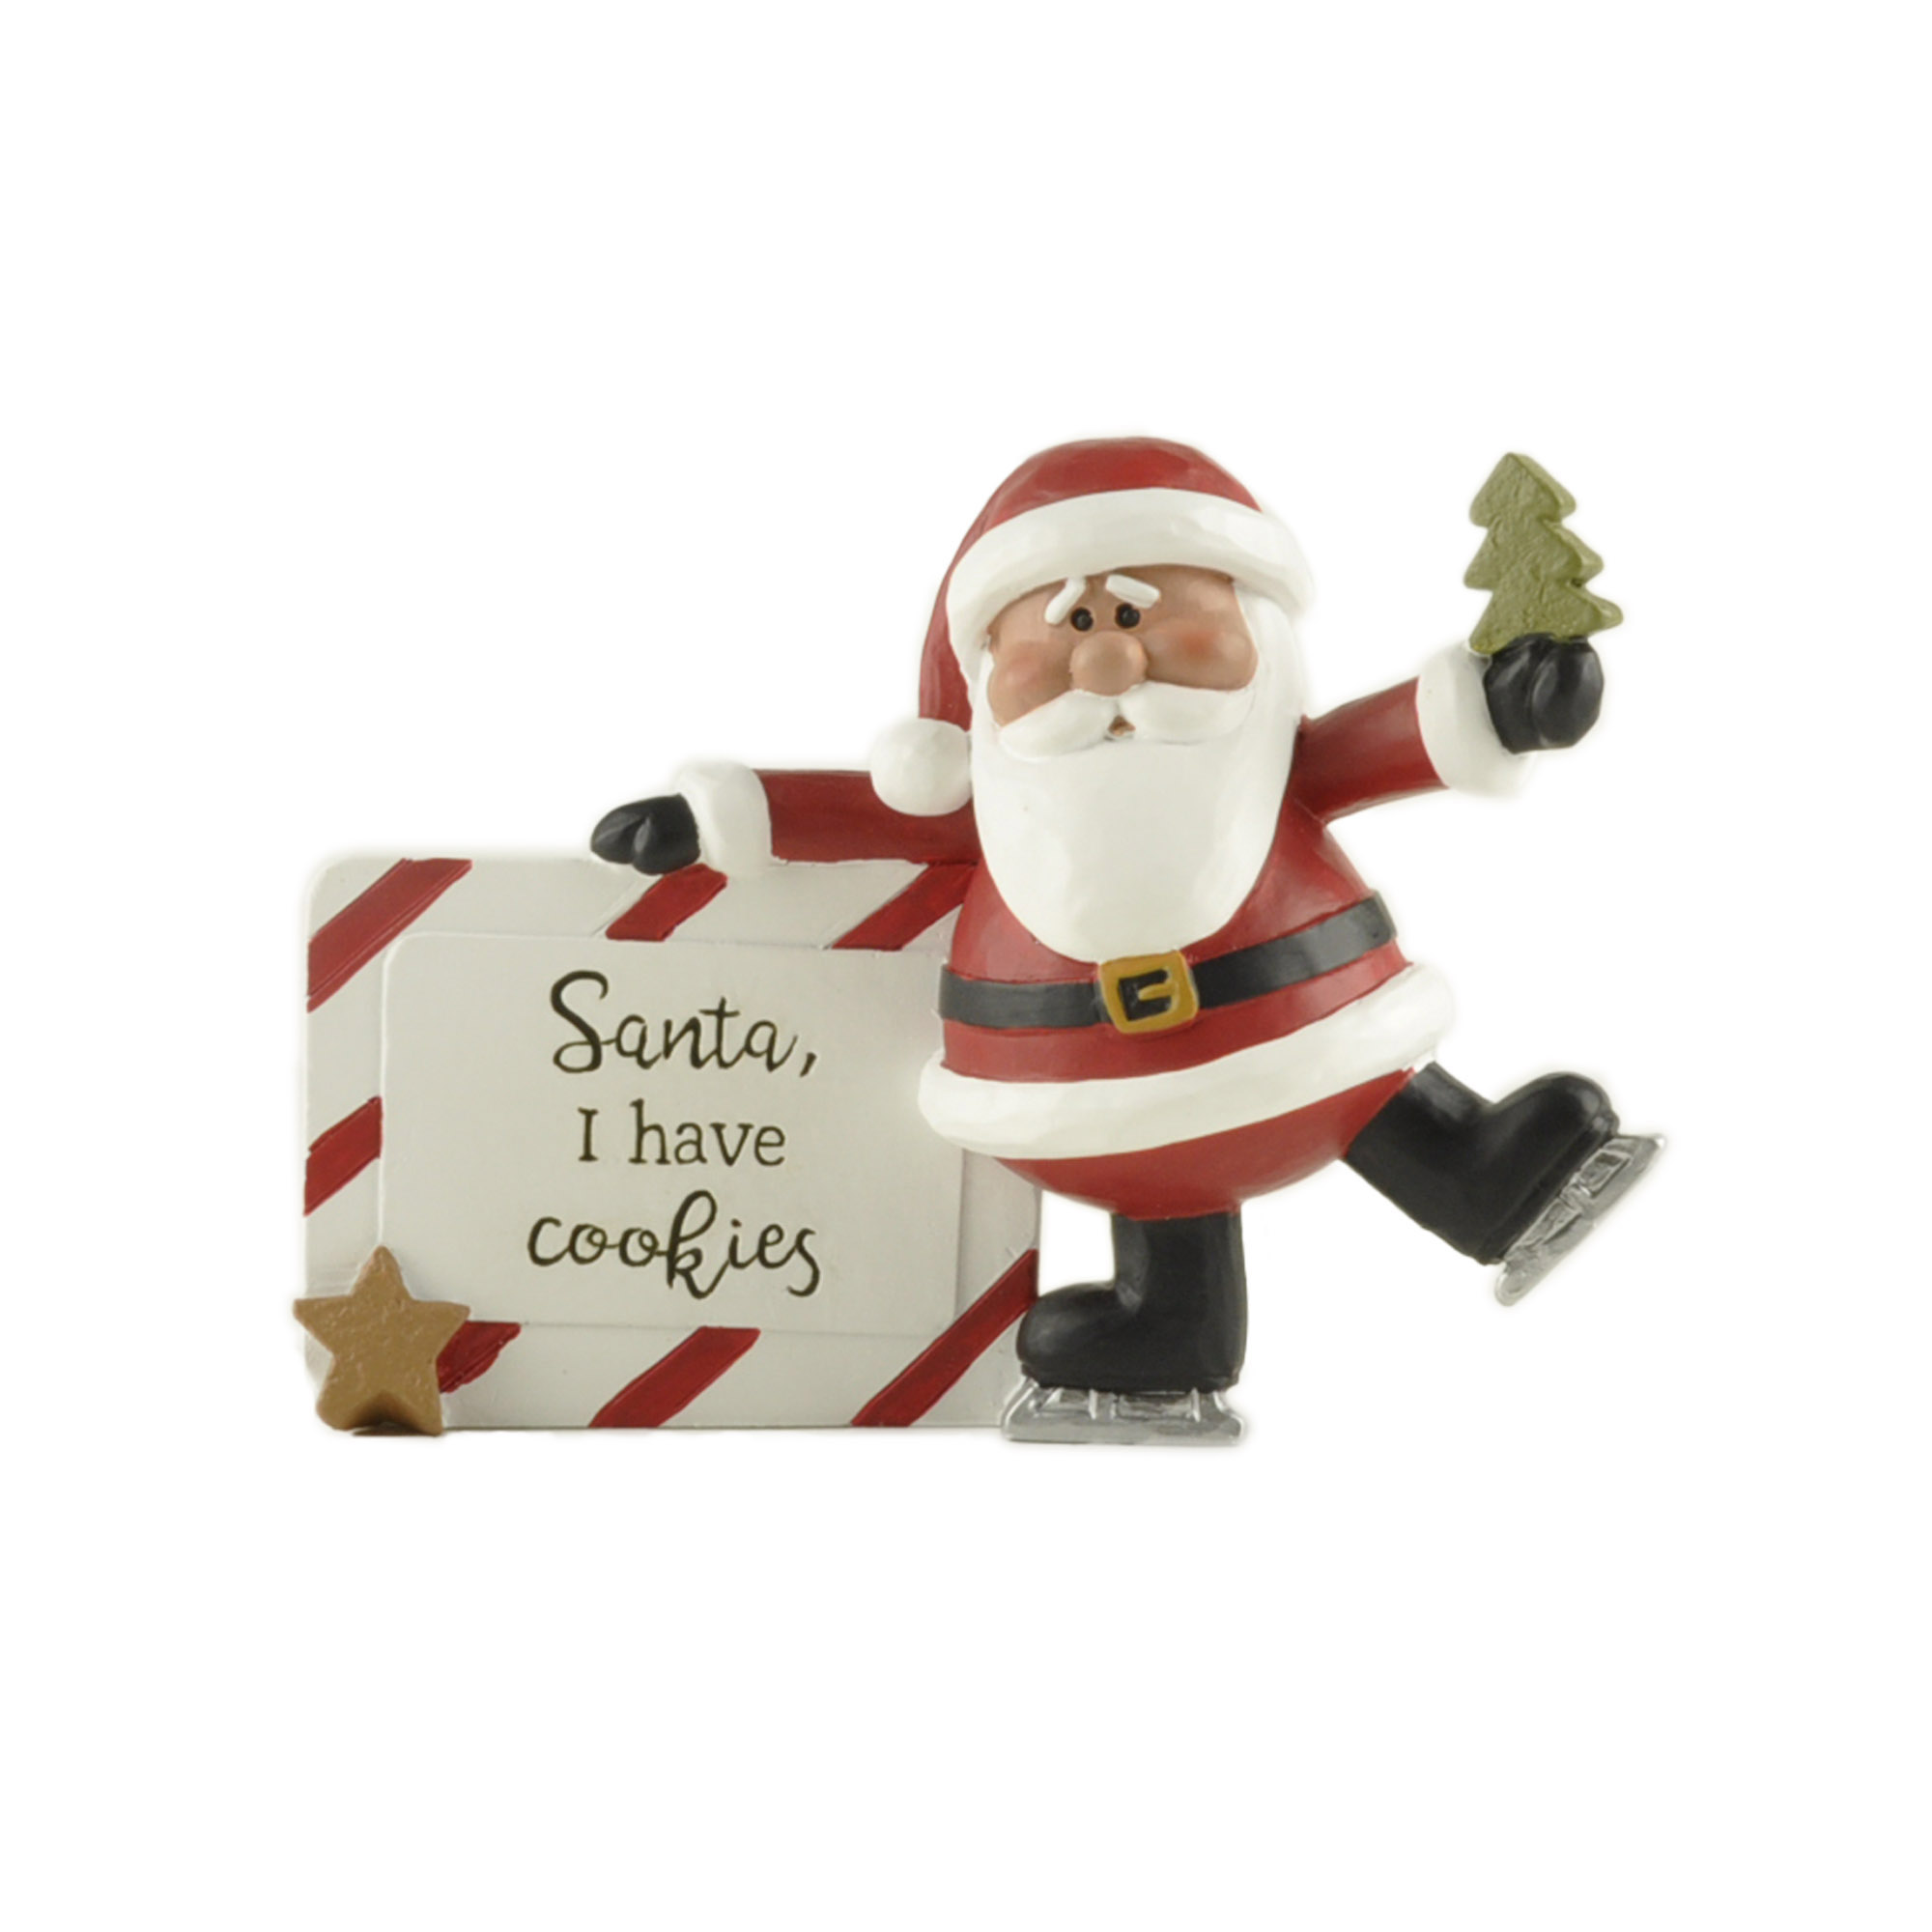 Charming Festive Resin Santa Figurine with 'Santa, I Have Cookies' Sign – Delightful Christmas Decoration for Home and Holiday Cheer 238-13911